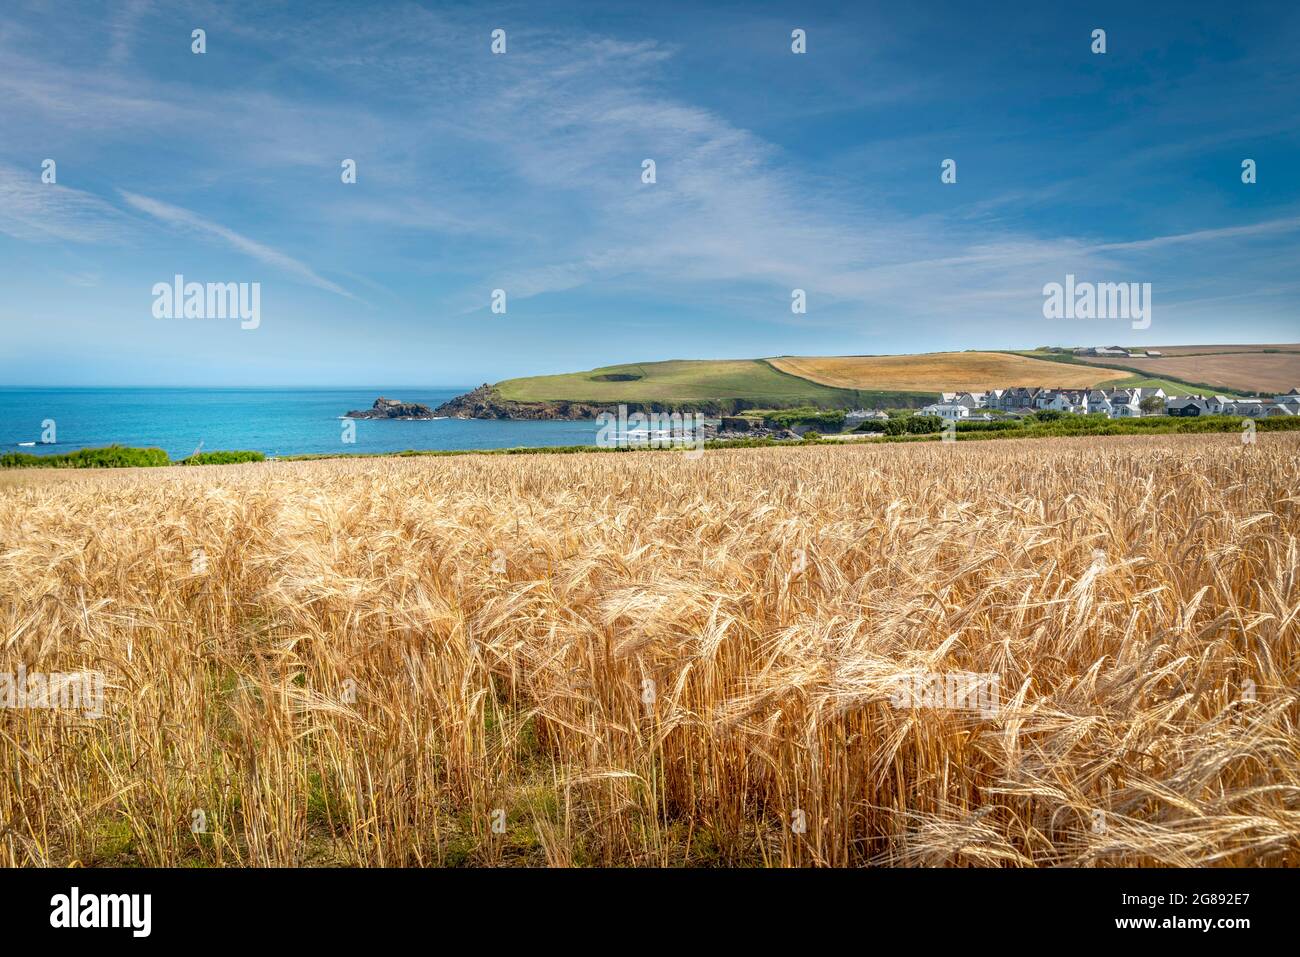 A field of golden ripe wheat / barley under bright summer skies over looking the sea on the  north  coast  Cornwall Stock Photo